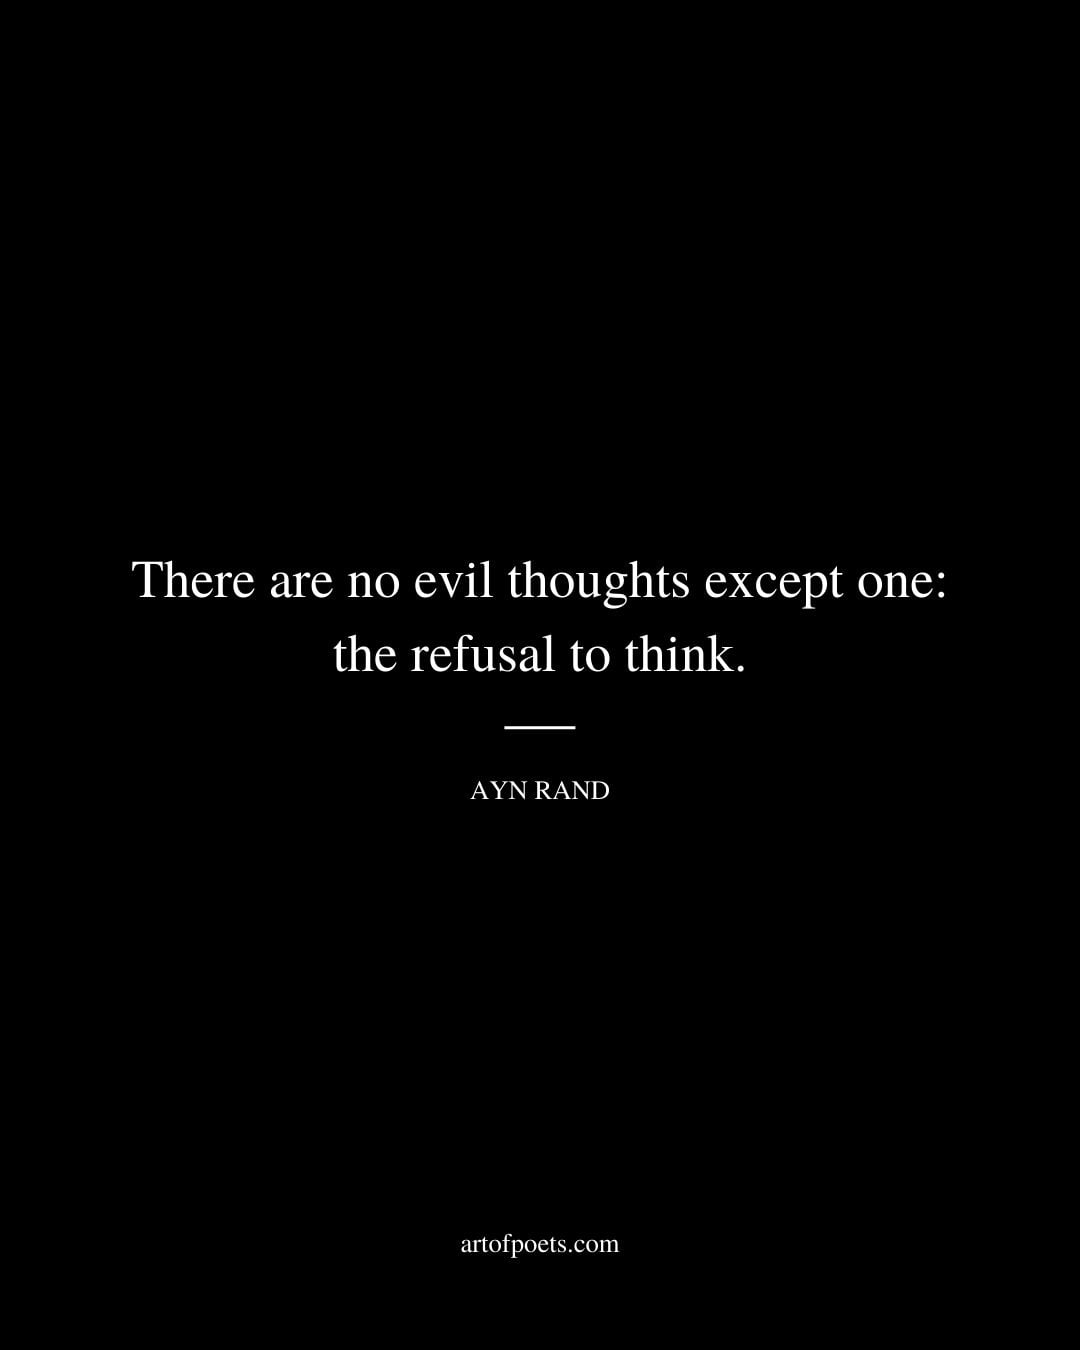 There are no evil thoughts except one the refusal to think